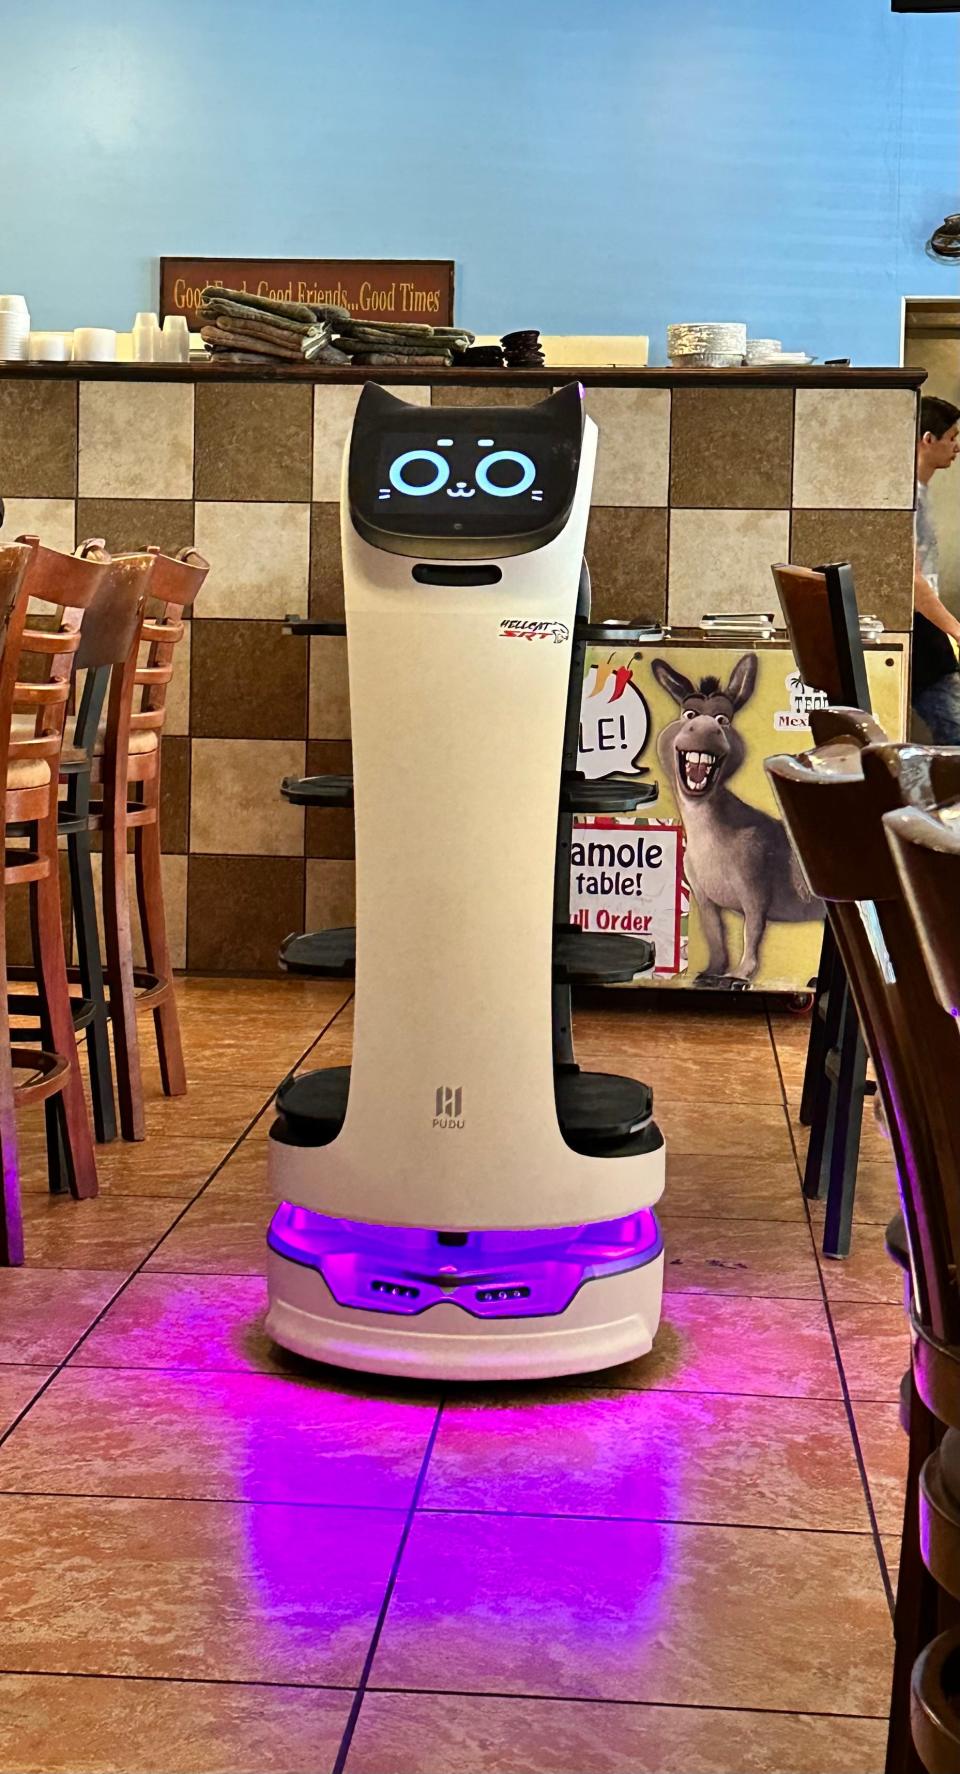 BellaBot, which is affectionately known as Bella, heads is on her way to greet a new customer at Canton's Don Tequila restaurant.